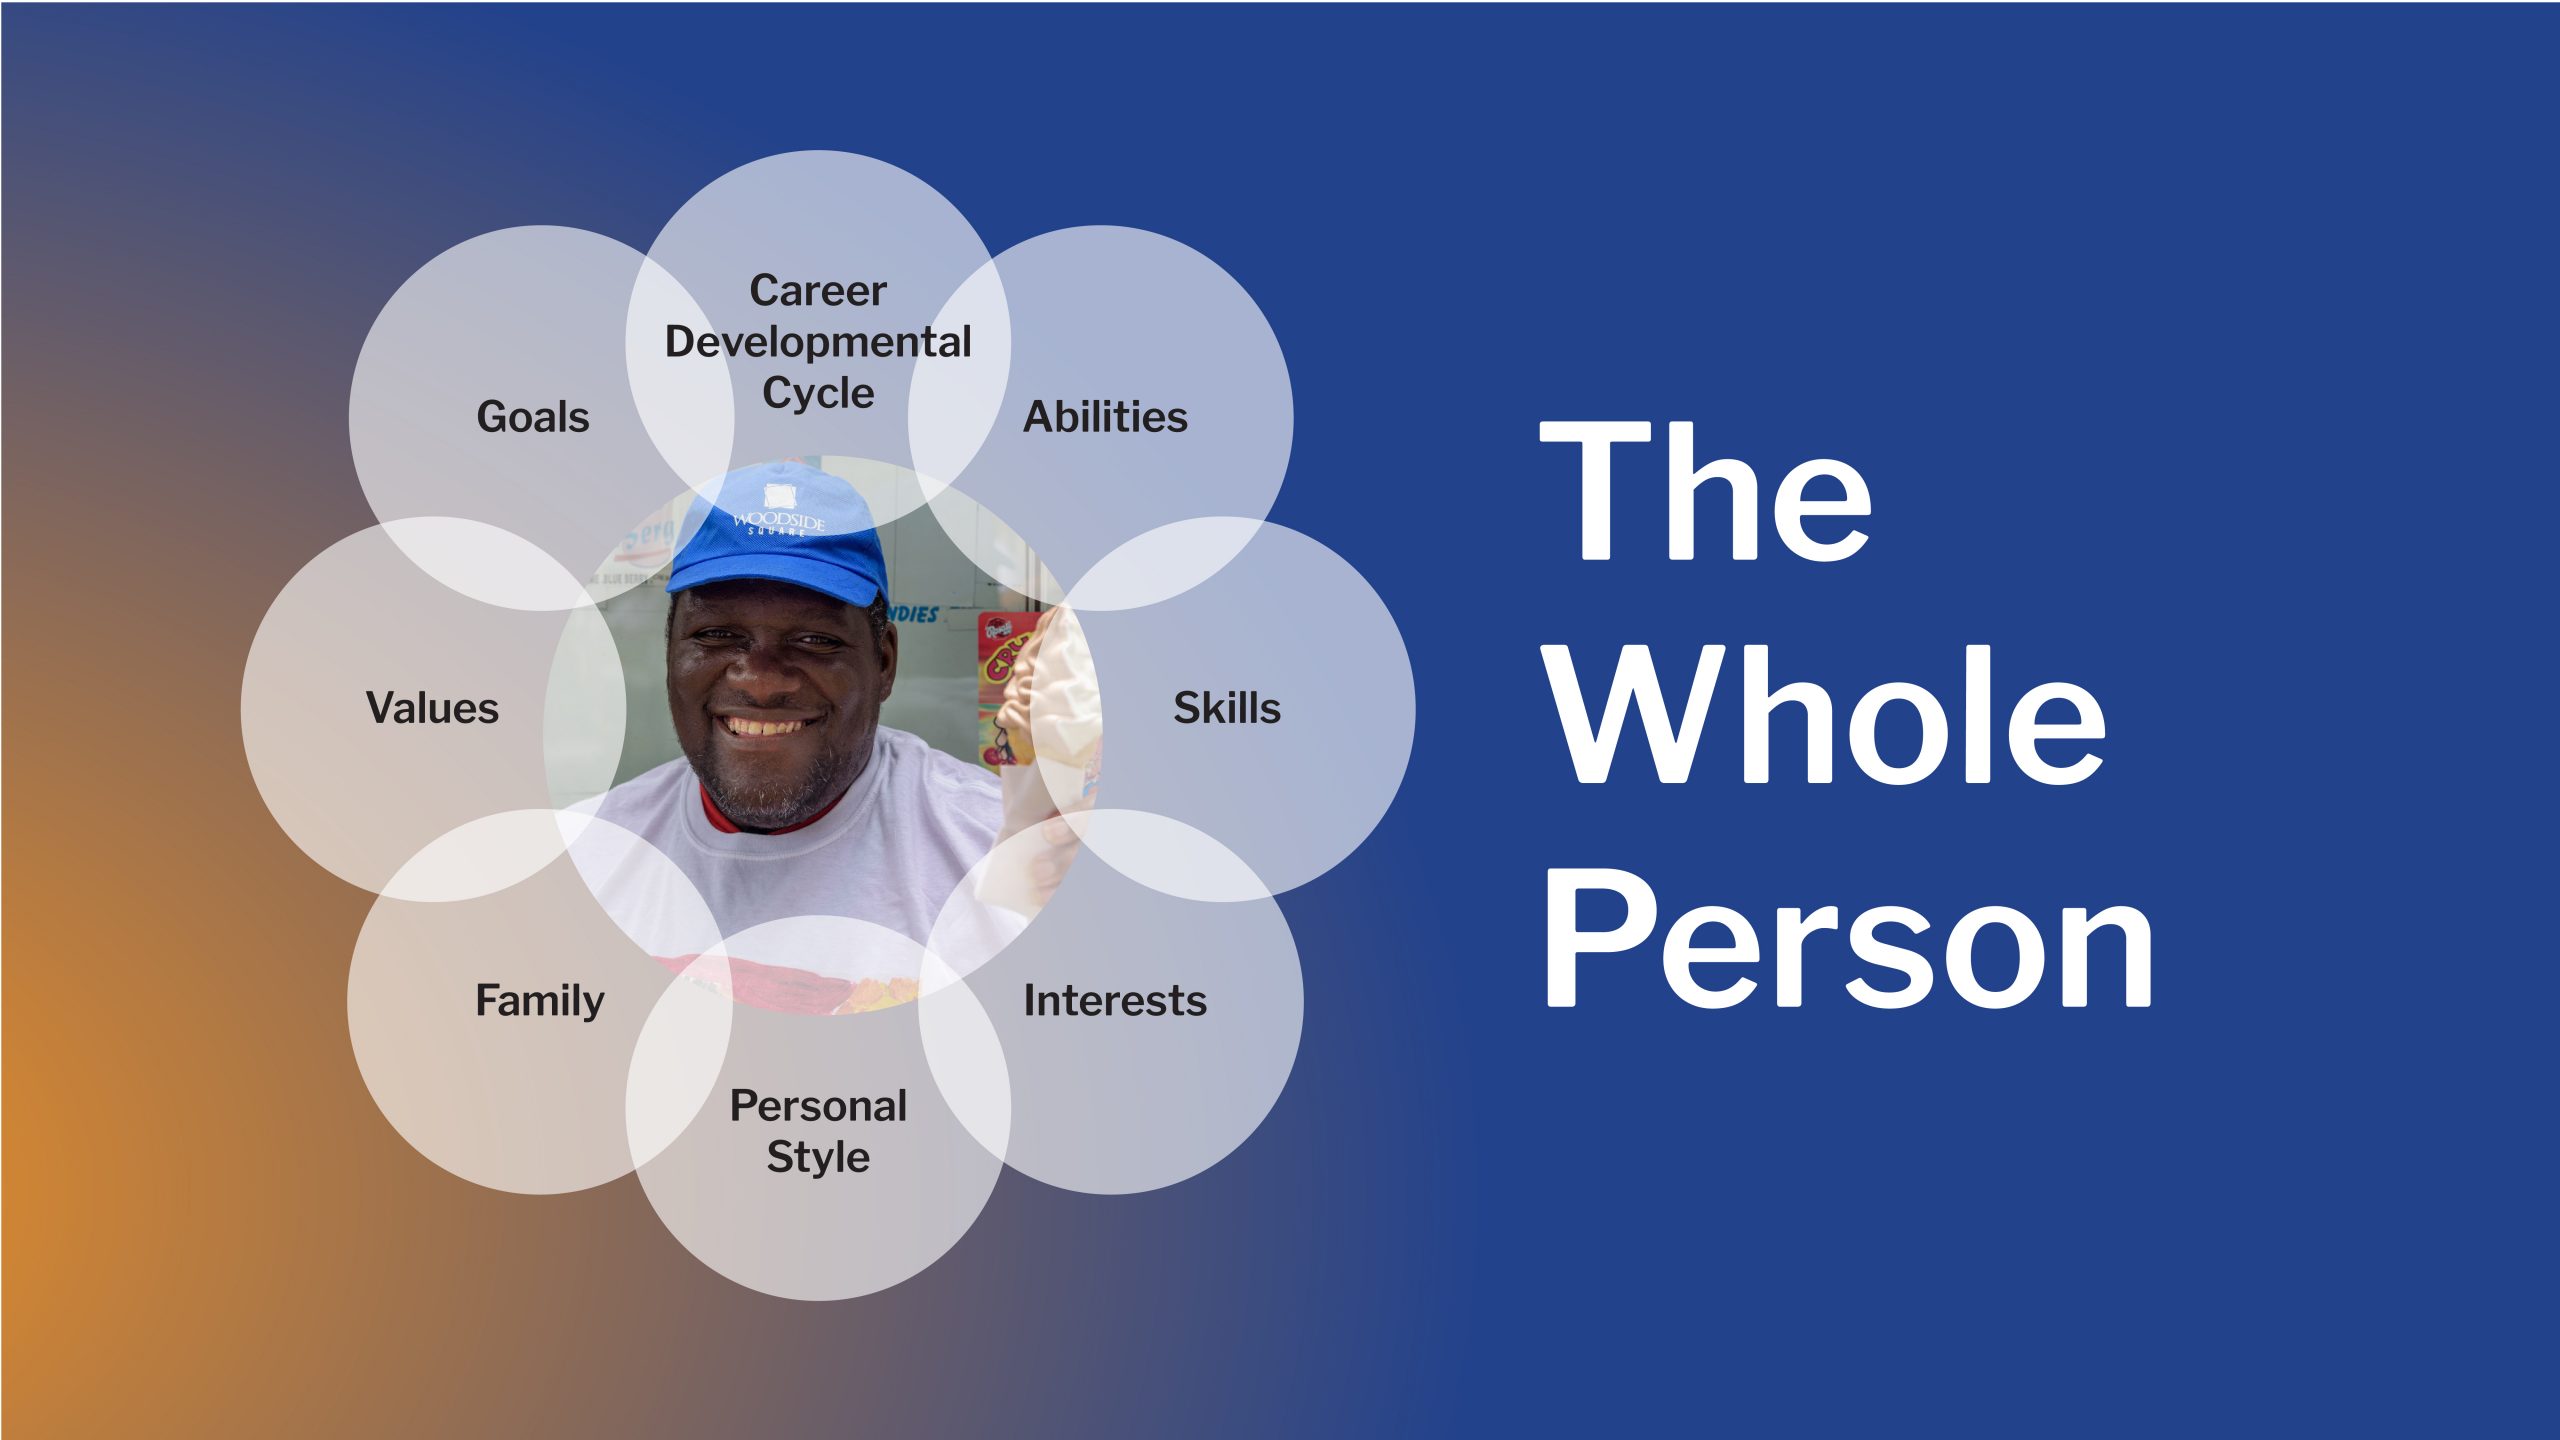 The Whole Person: Career development cycle, Abilities, Skills, Interests, Personal Style, Family, Values, Goals